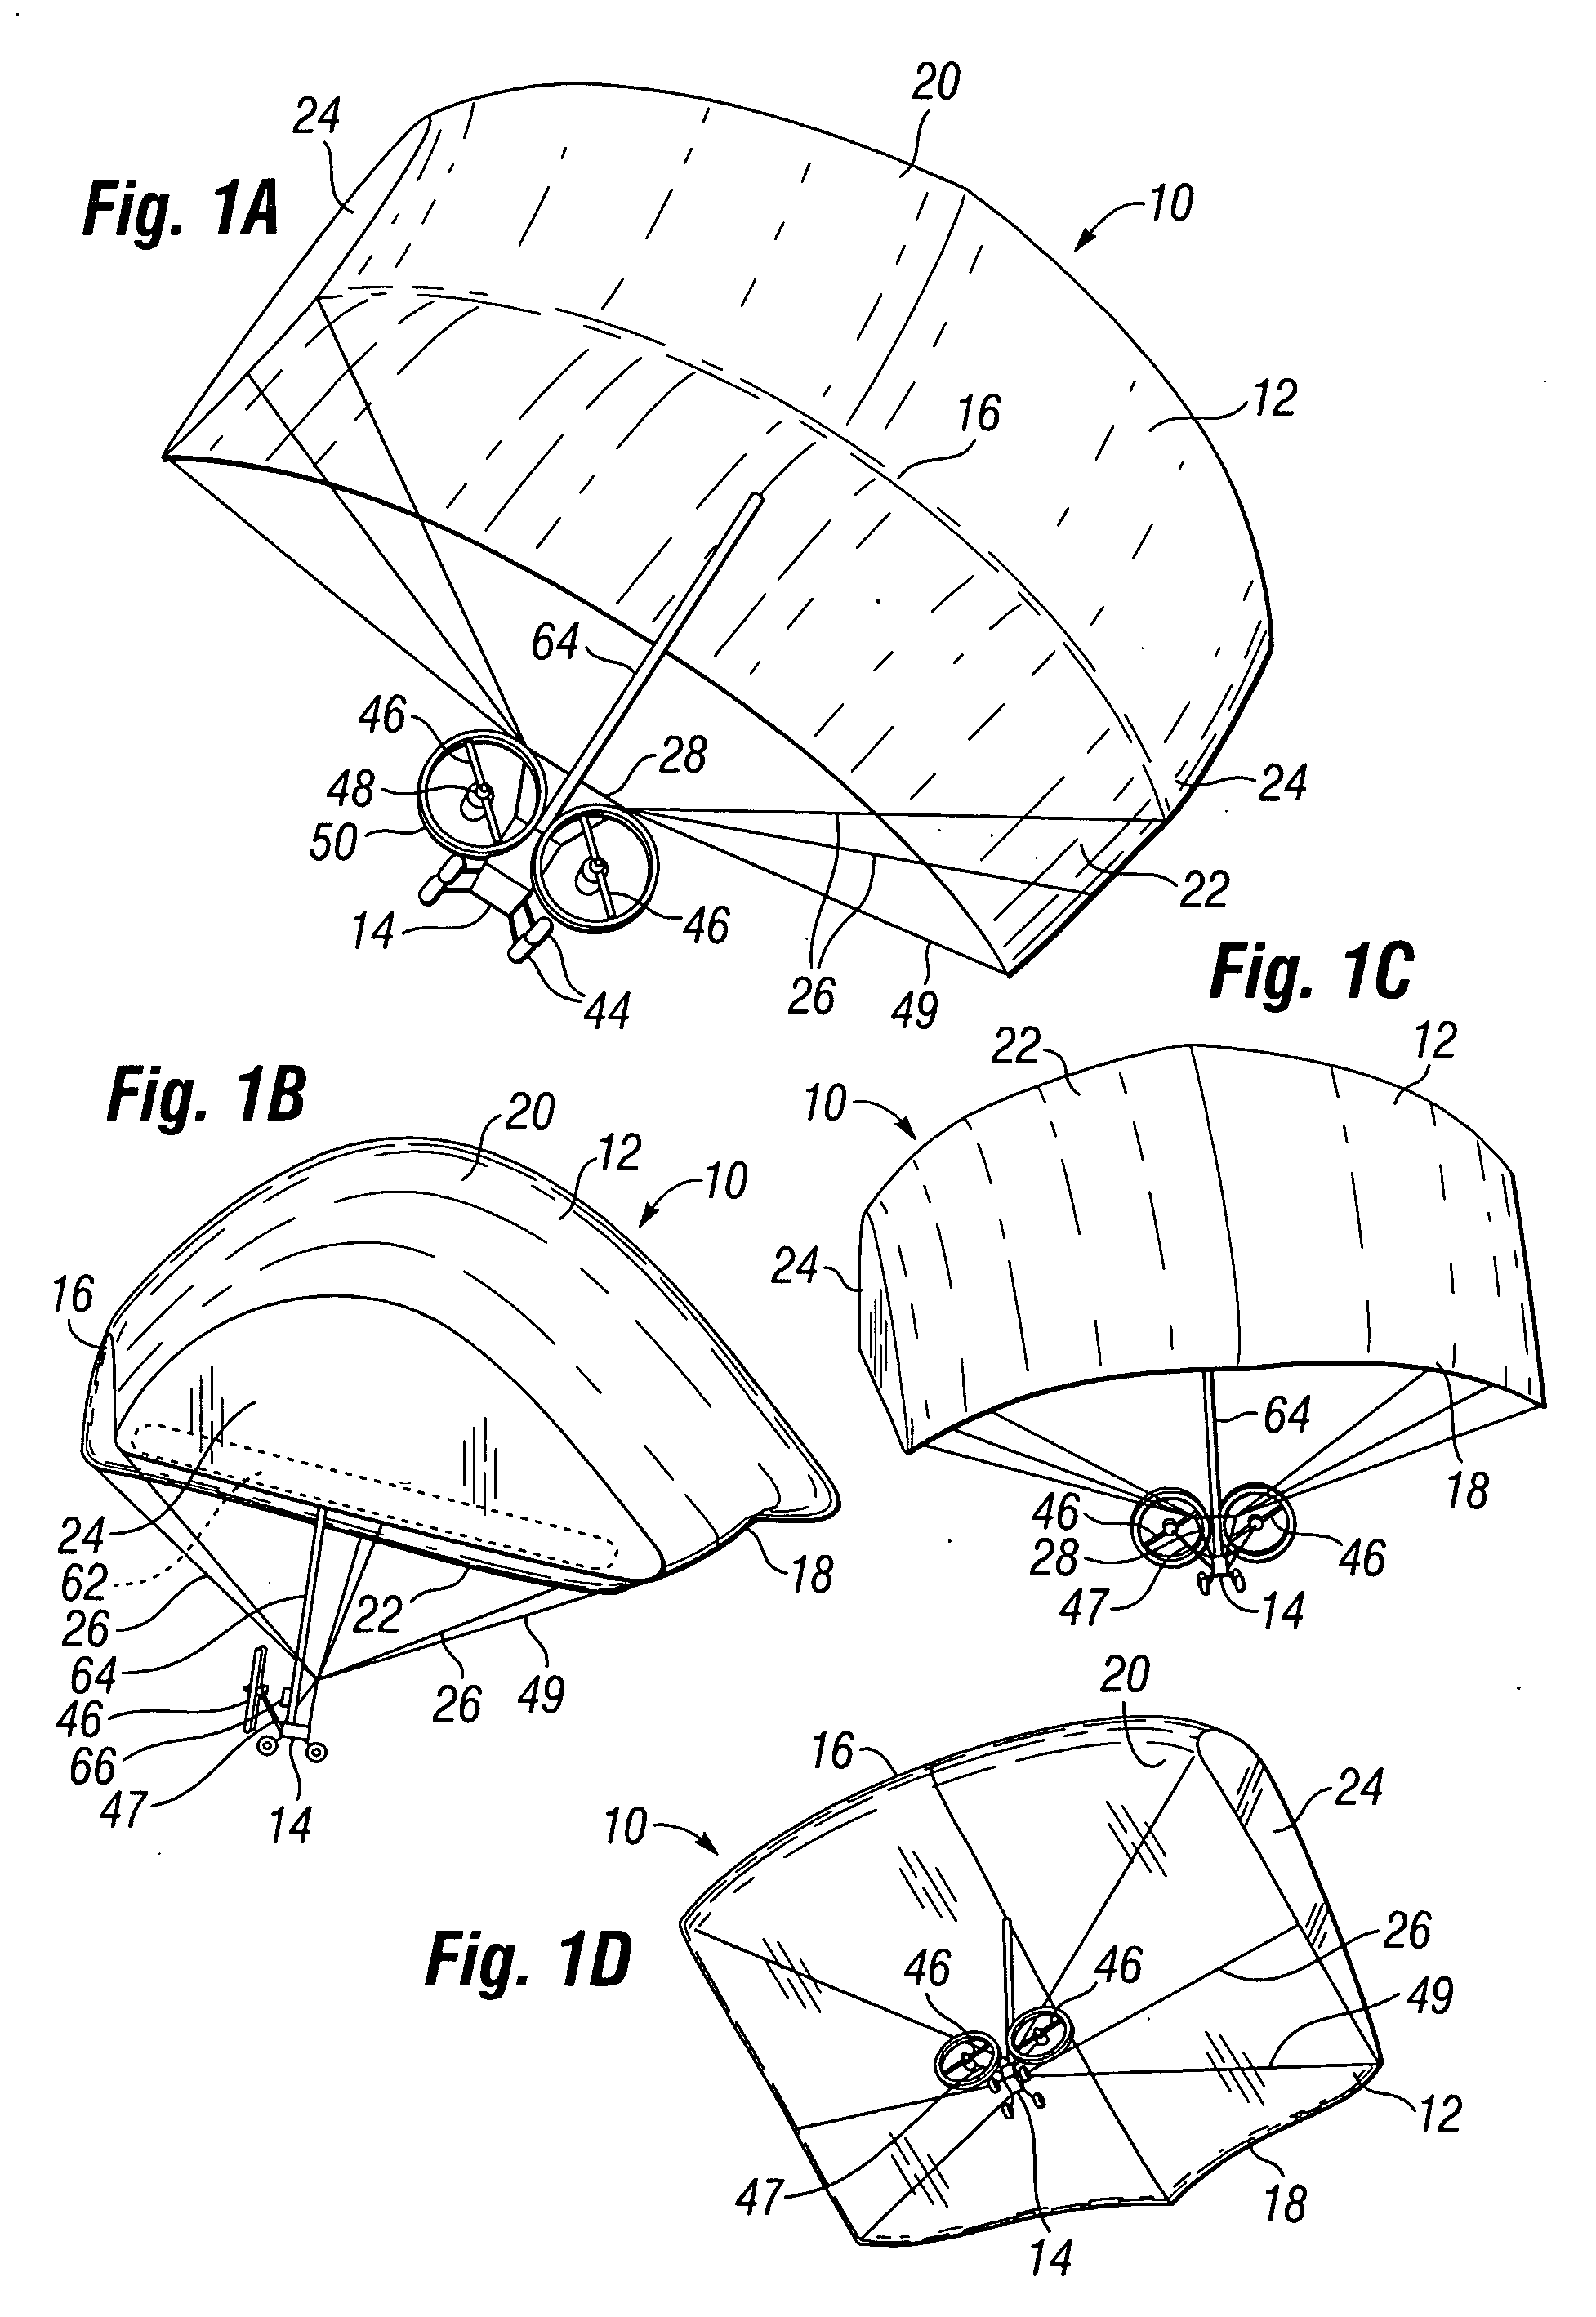 Inflatable wing flight vehicle